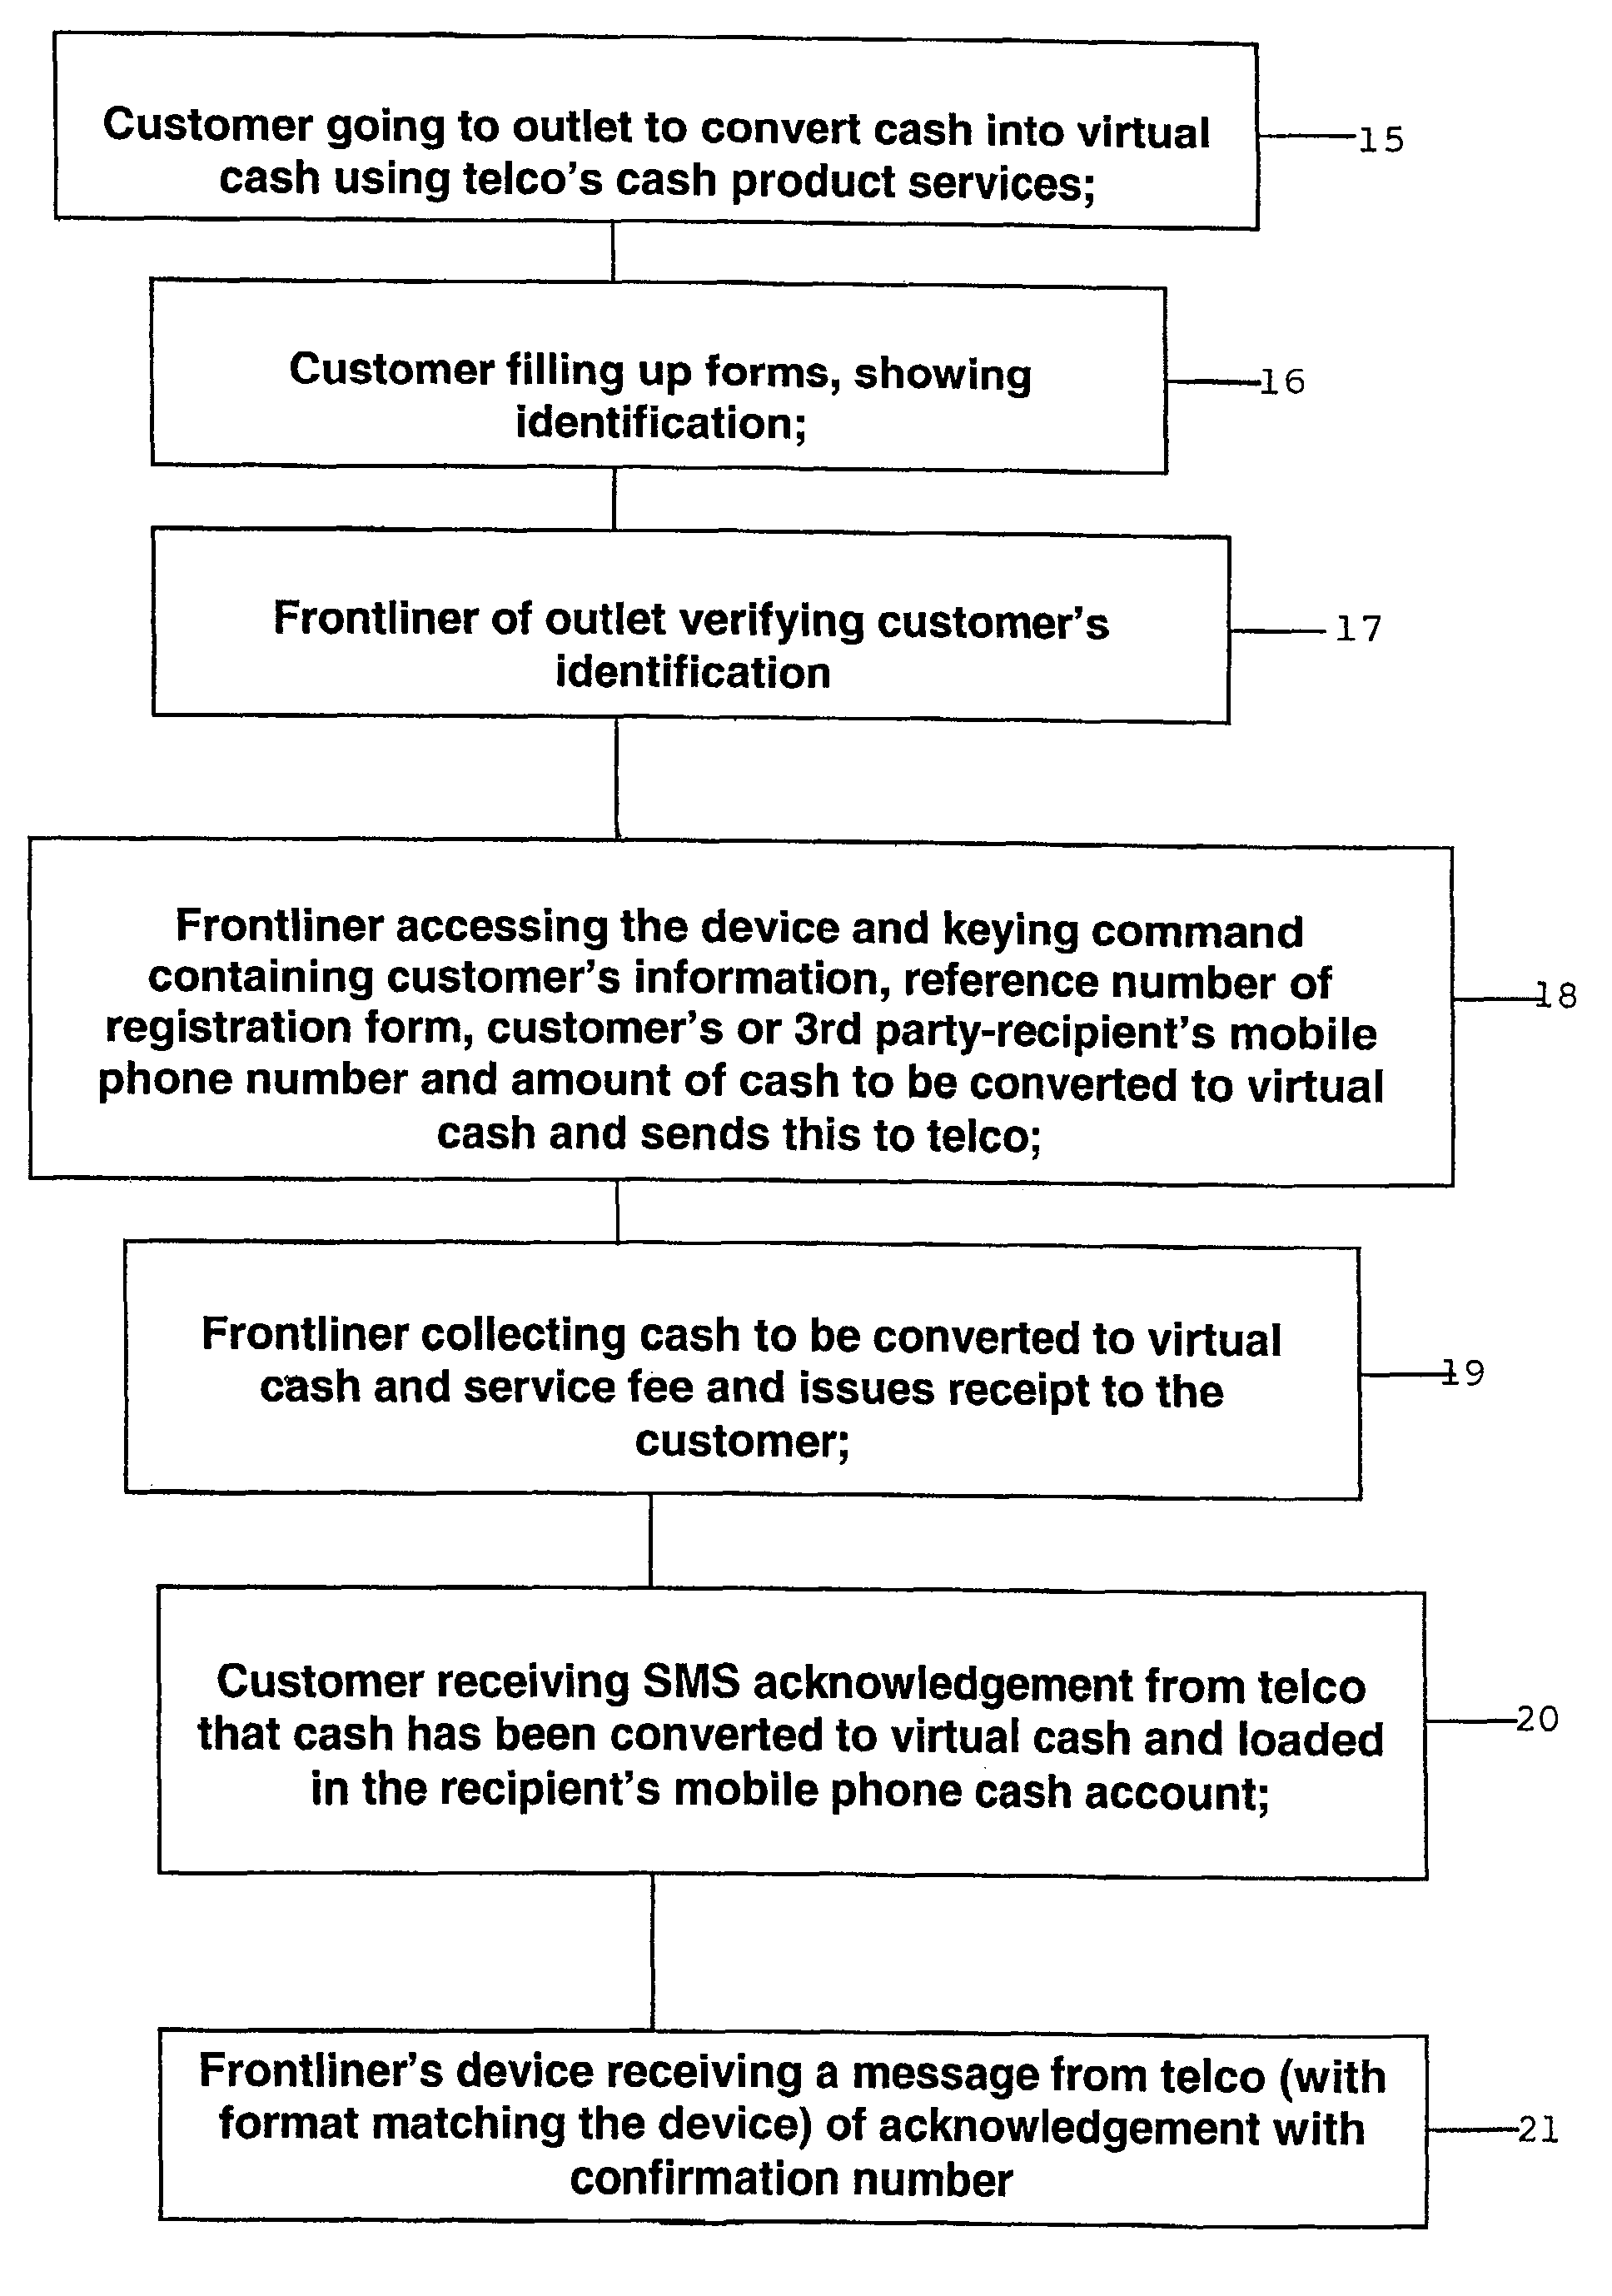 Method of converting cash into virtual cash and loading it to mobile phone cash account